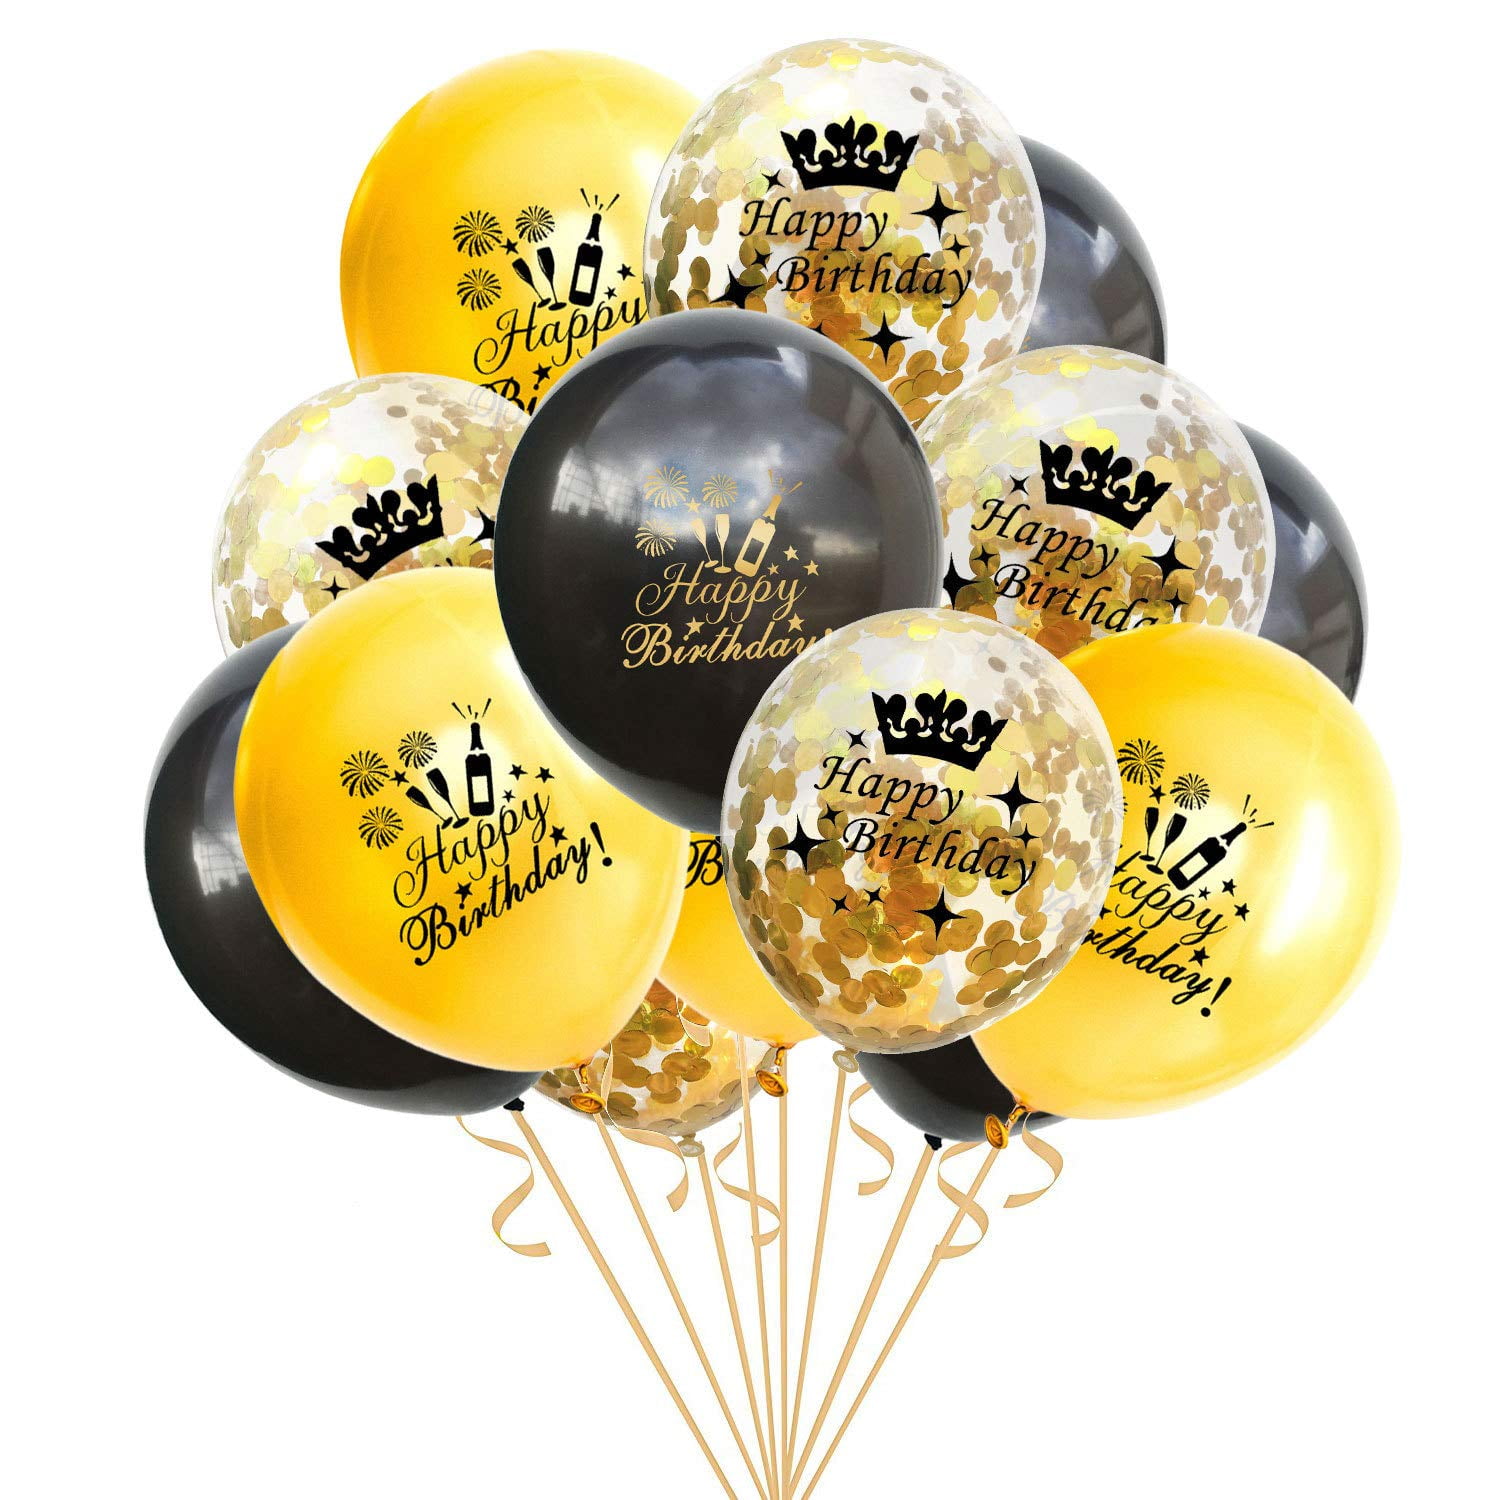  Jonhamwelbor 50th Birthday Balloons Gold and Black Party  Decorations 15 Pack 12 inch Latex and Confetti Balloon Printed with Happy  Birthday 50 for Women Men : Toys & Games